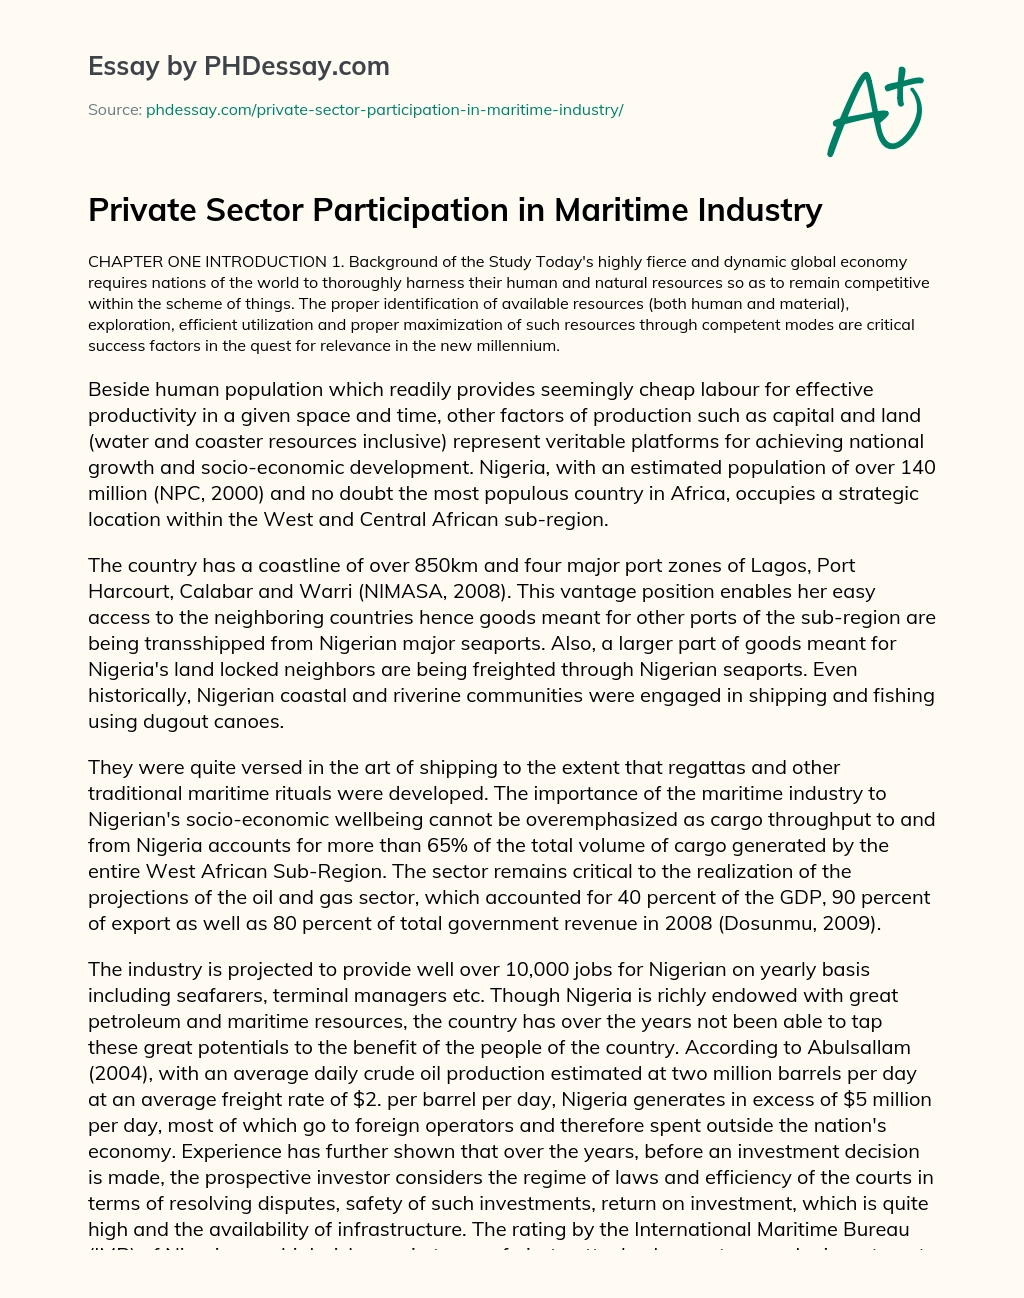 Private Sector Participation in Maritime Industry essay